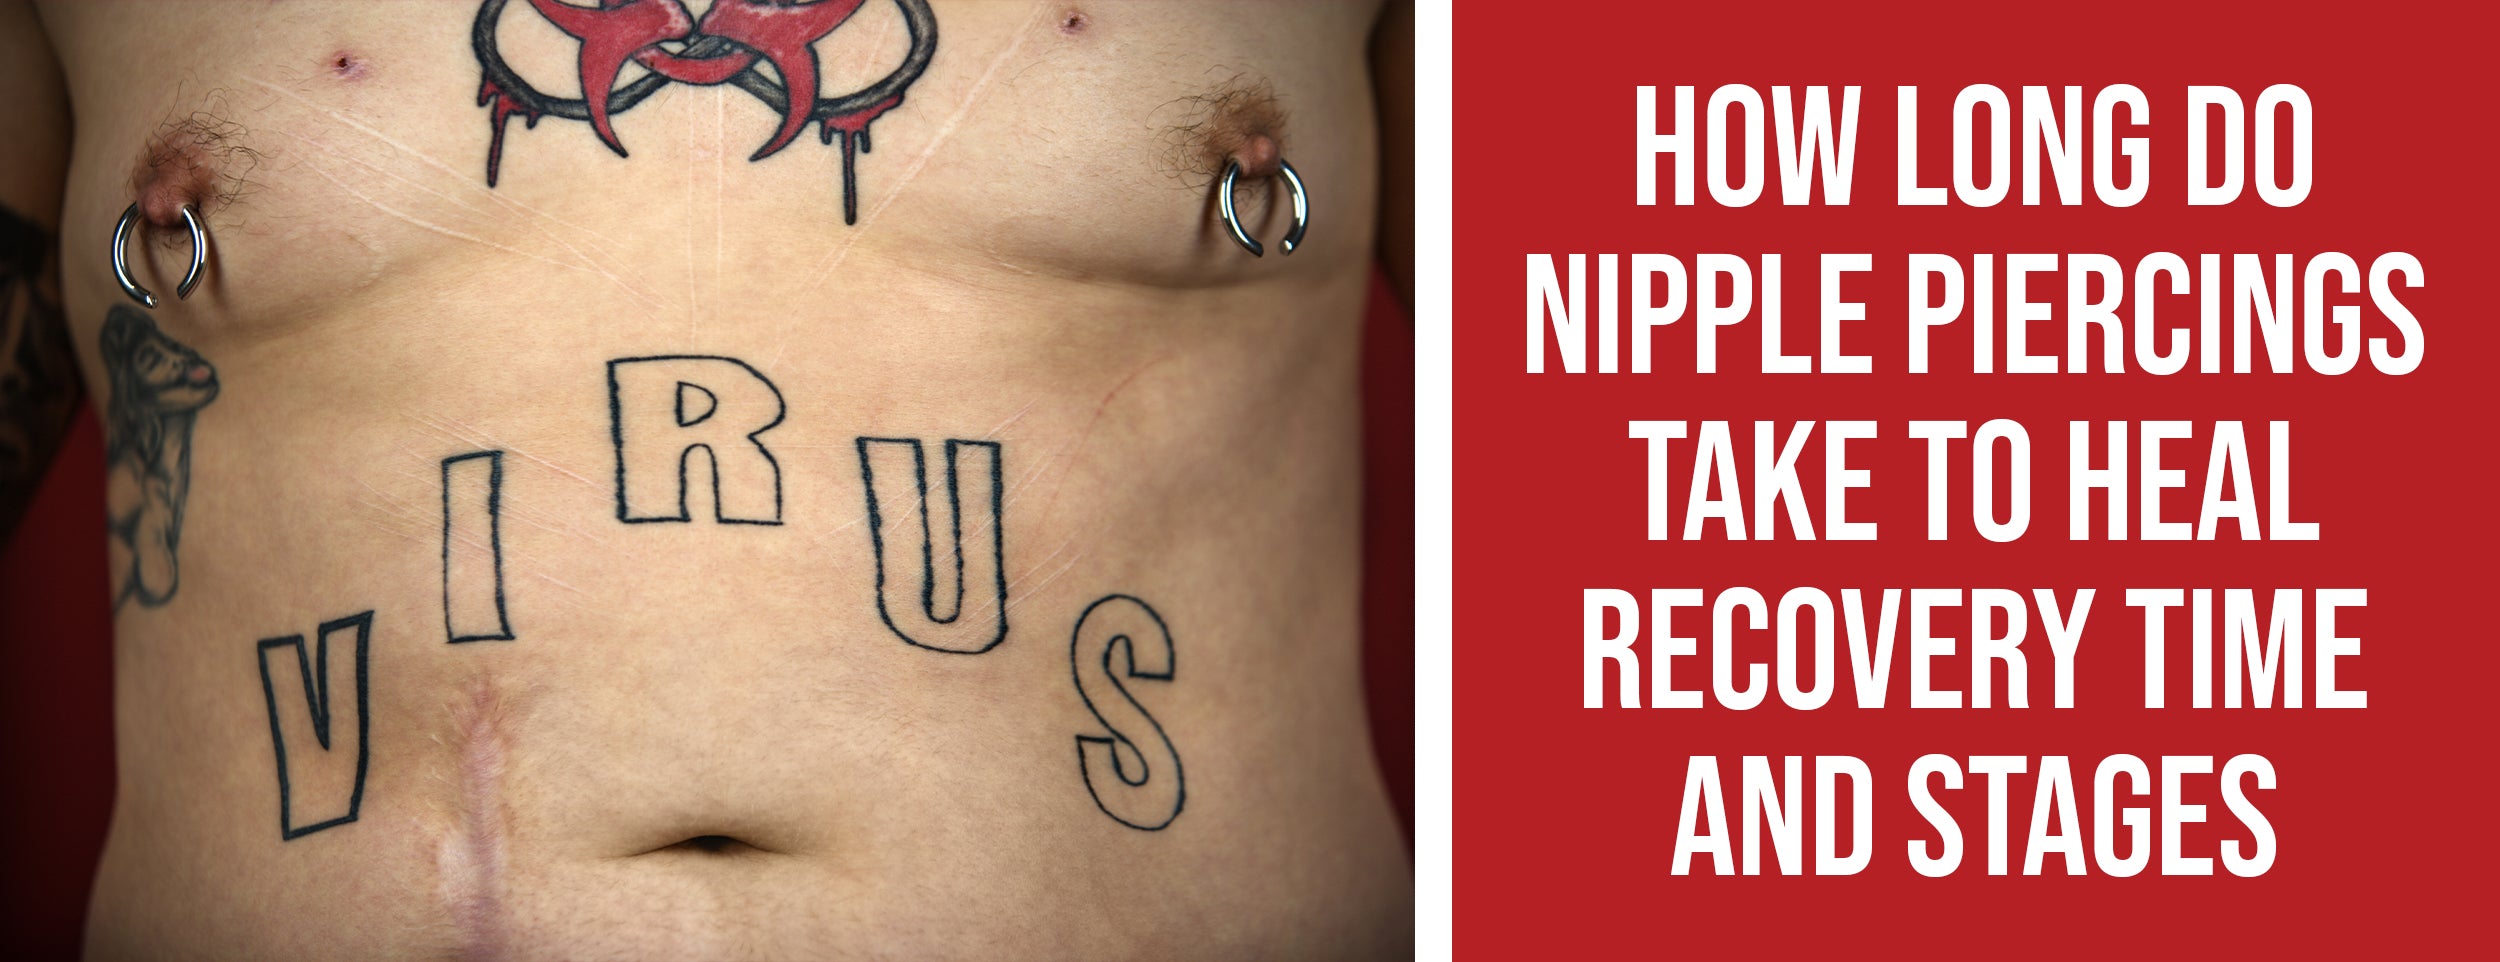 The Recovery Time and Stages of Nipple Piercings